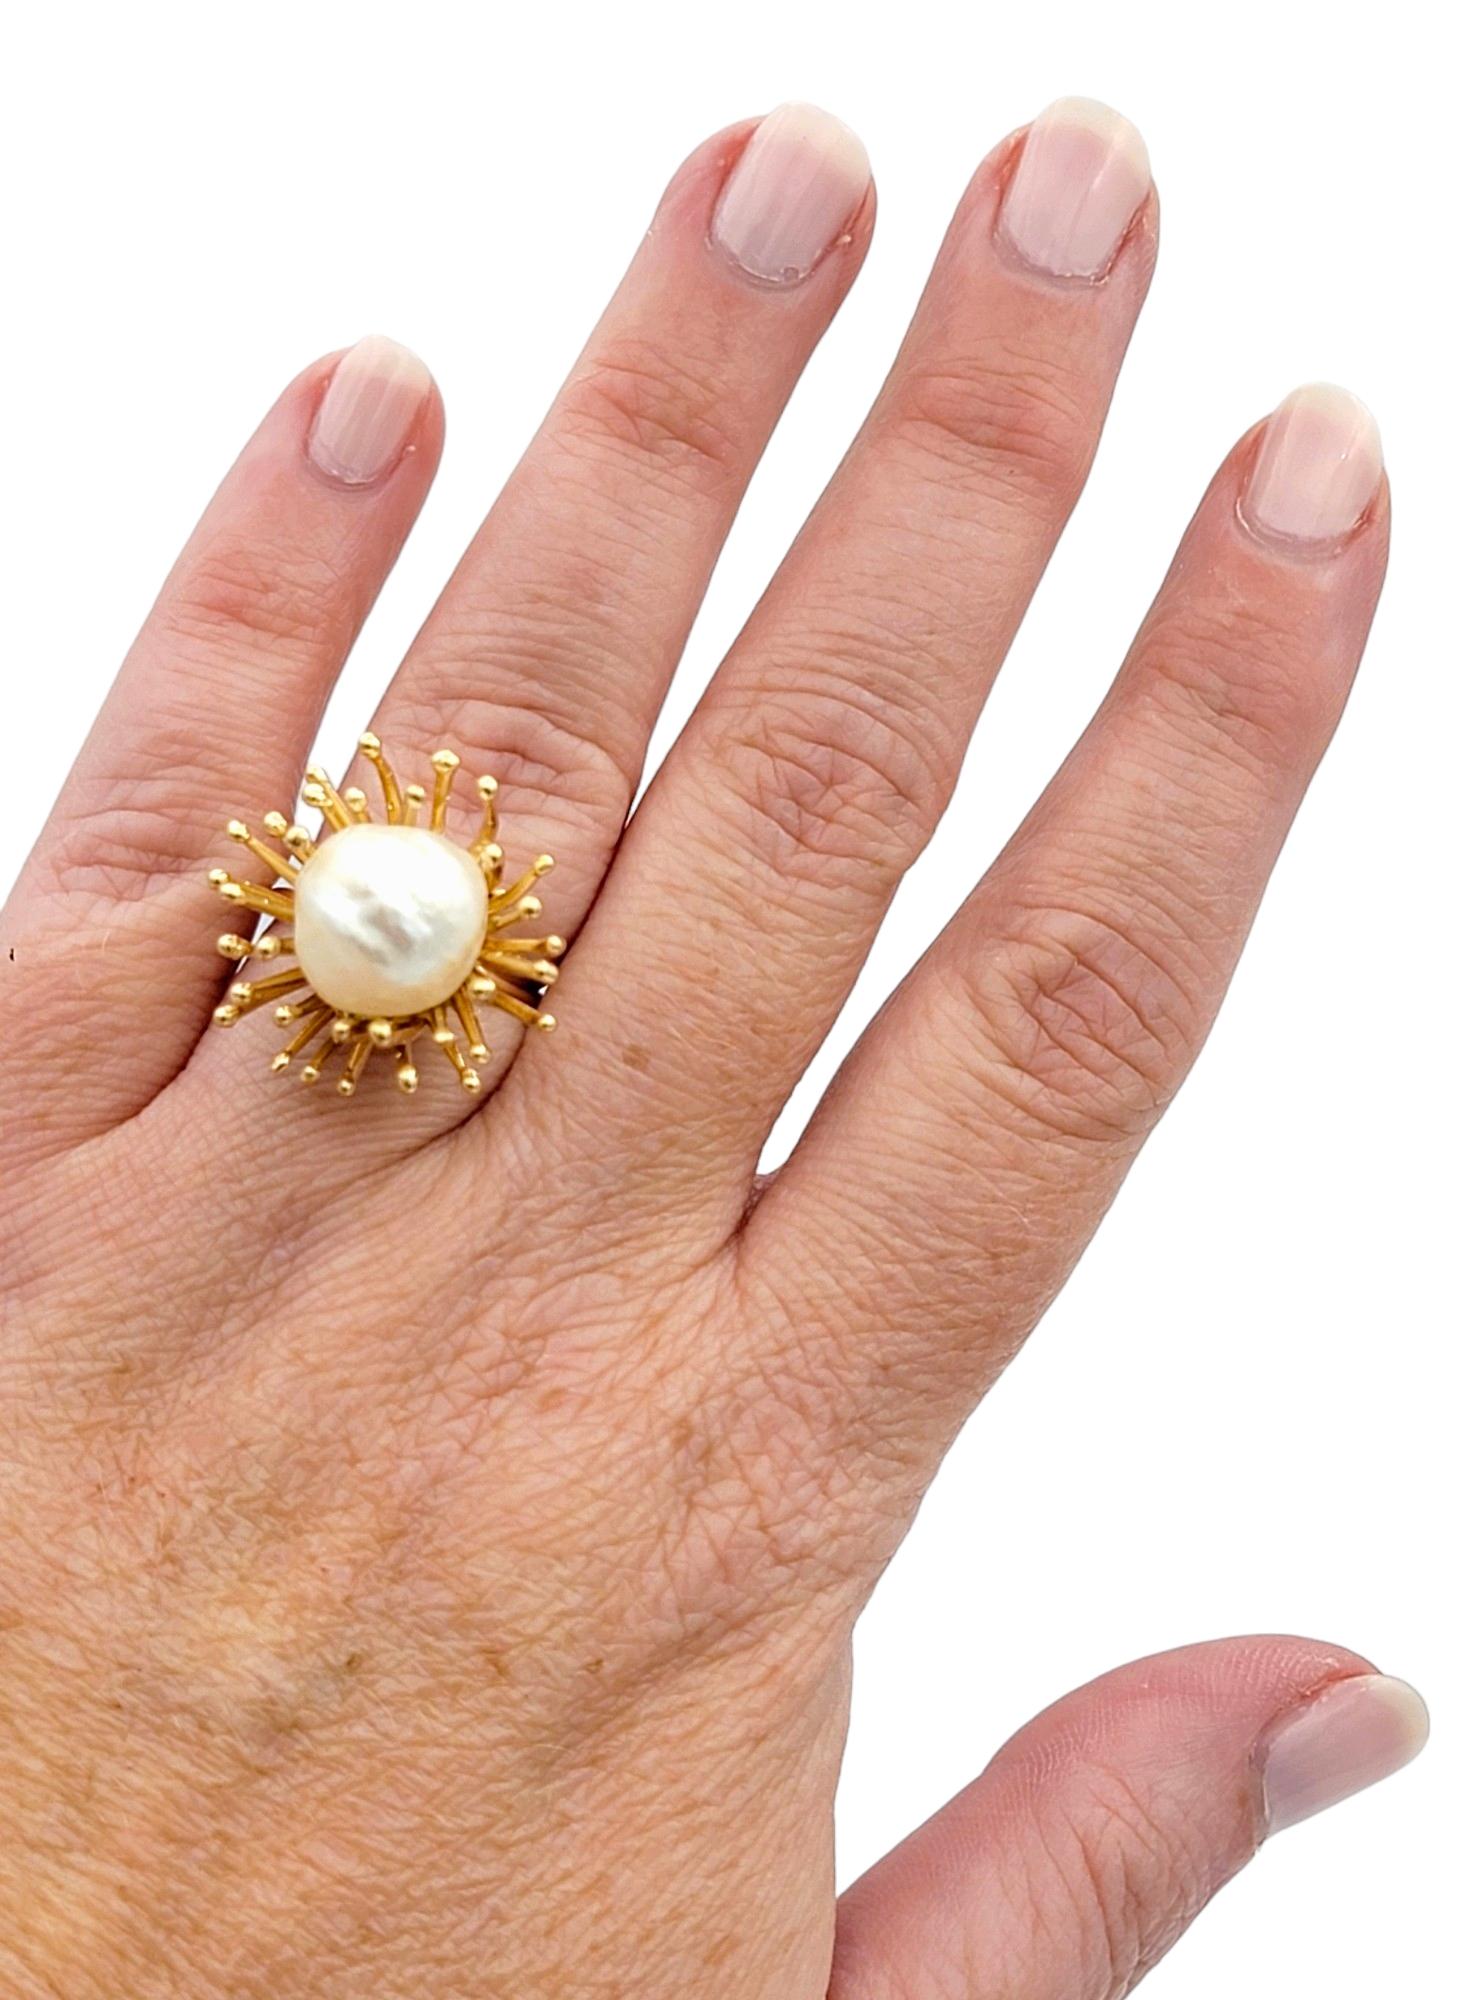 Baroque Cultured Pearl Spiky Spray Motif Cocktail Ring in 18 Karat Yellow Gold For Sale 1